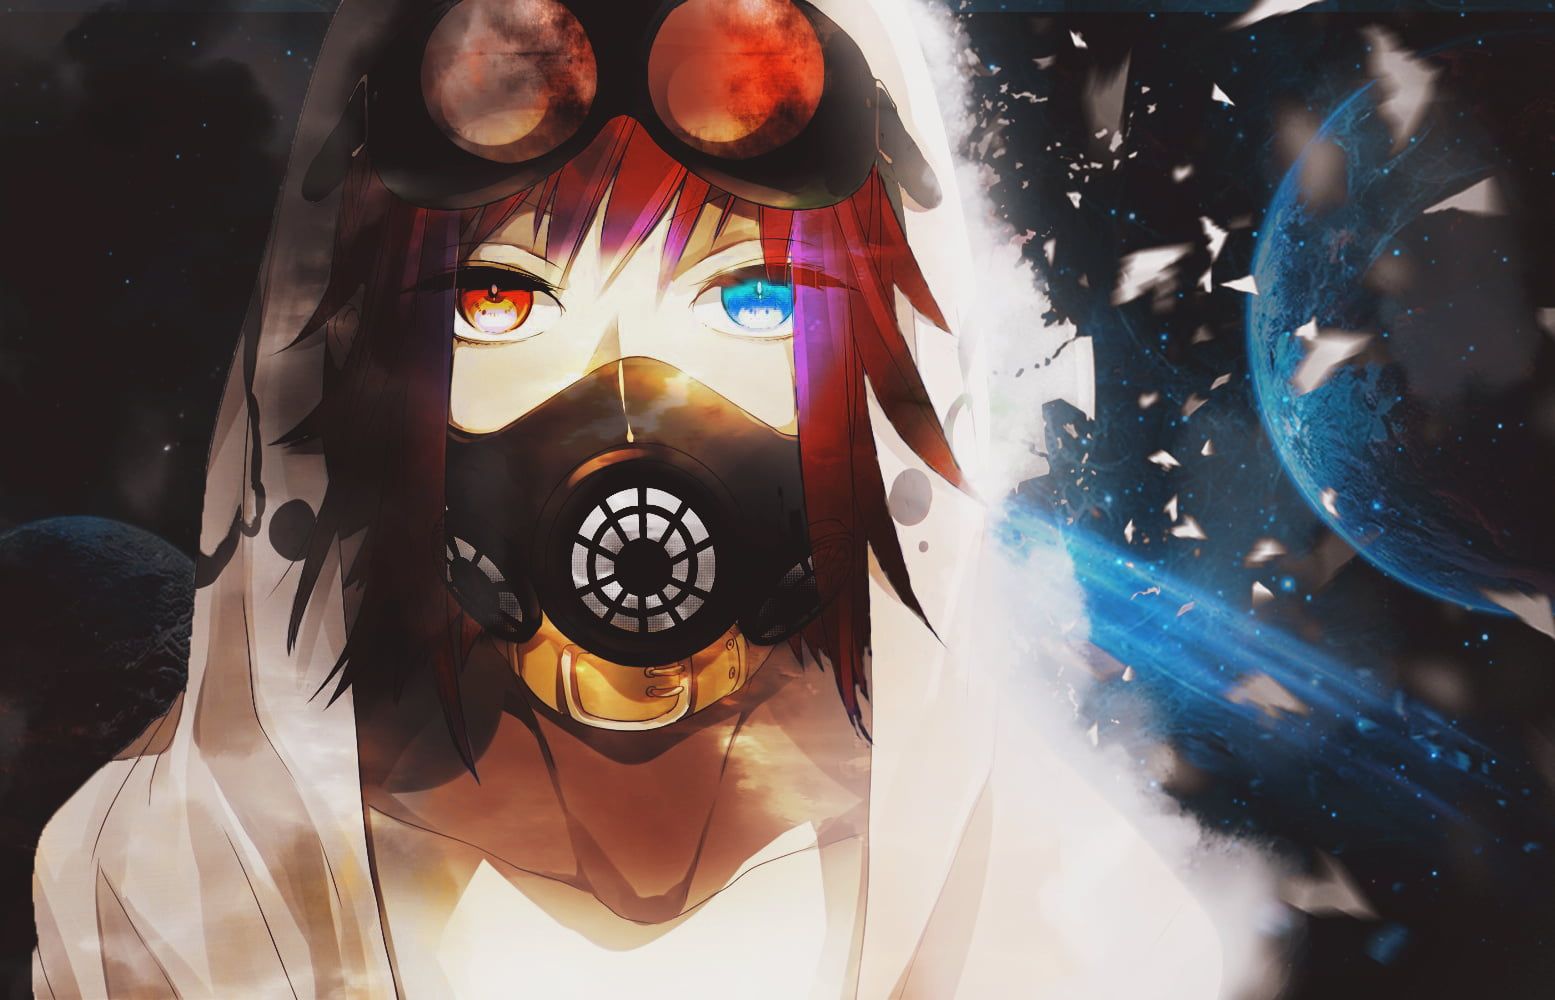 Anime Masked Character Wallpapers - Wallpaper Cave